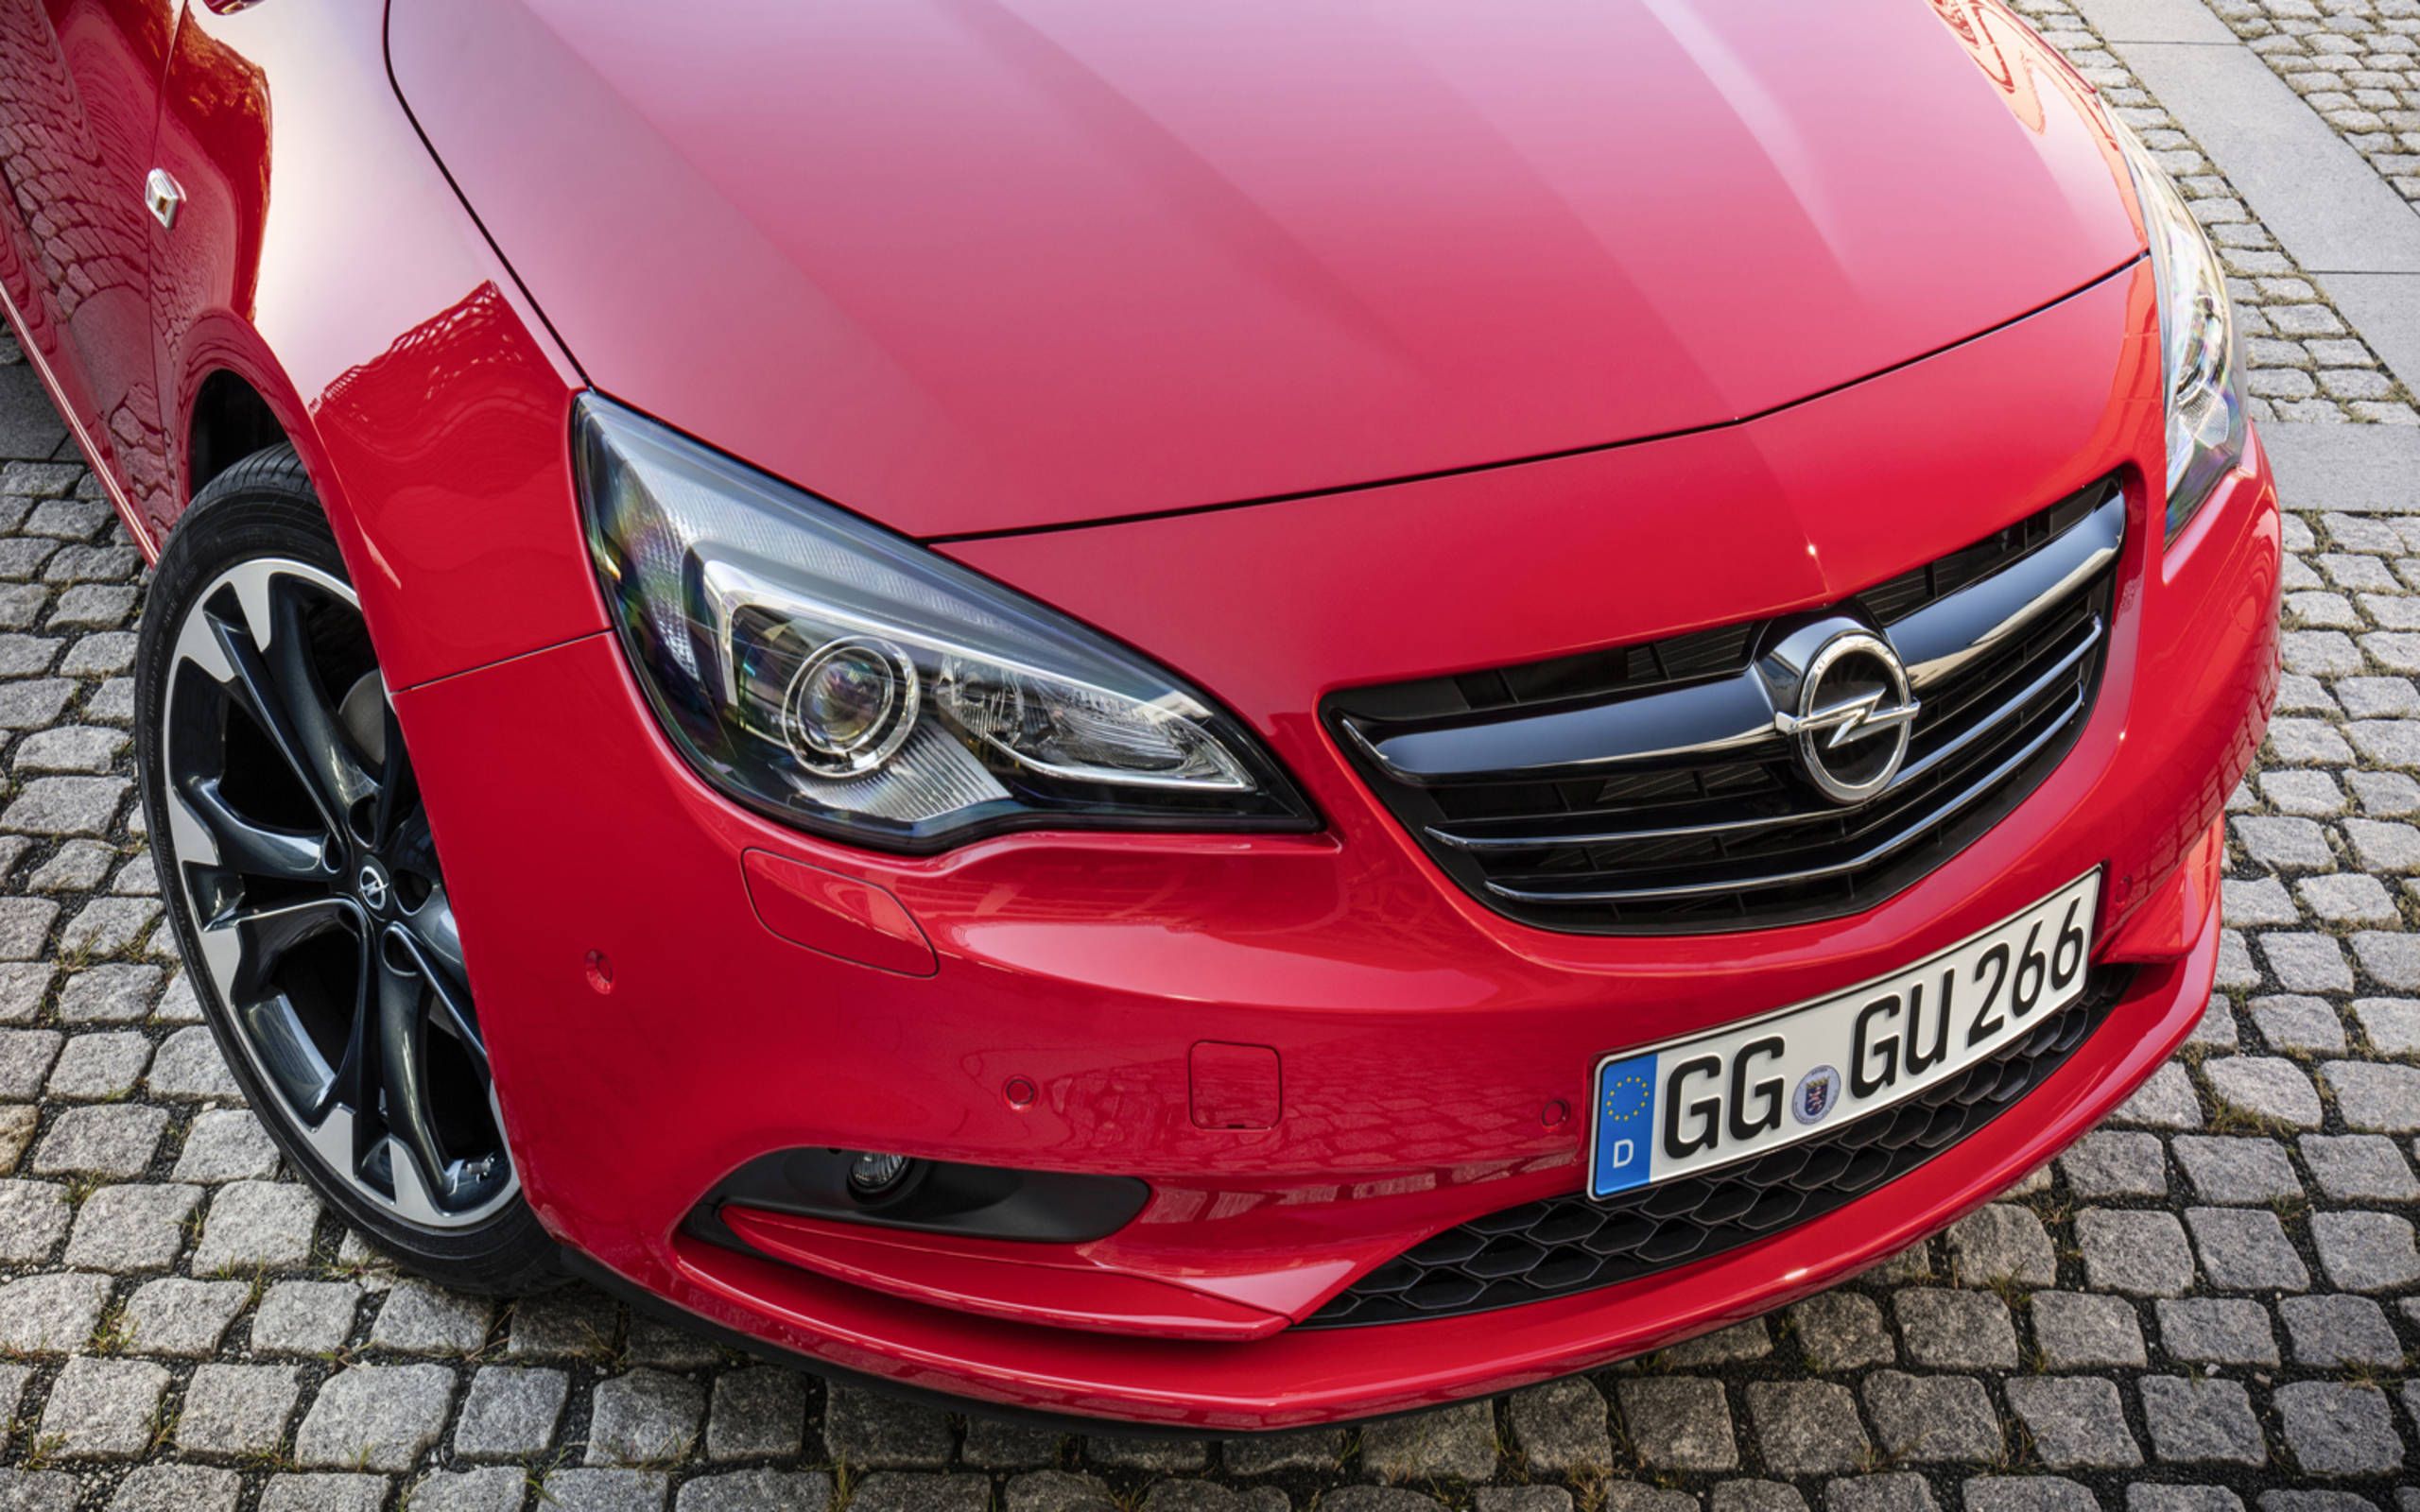 Opel became GM's precious jewel in the 1990s